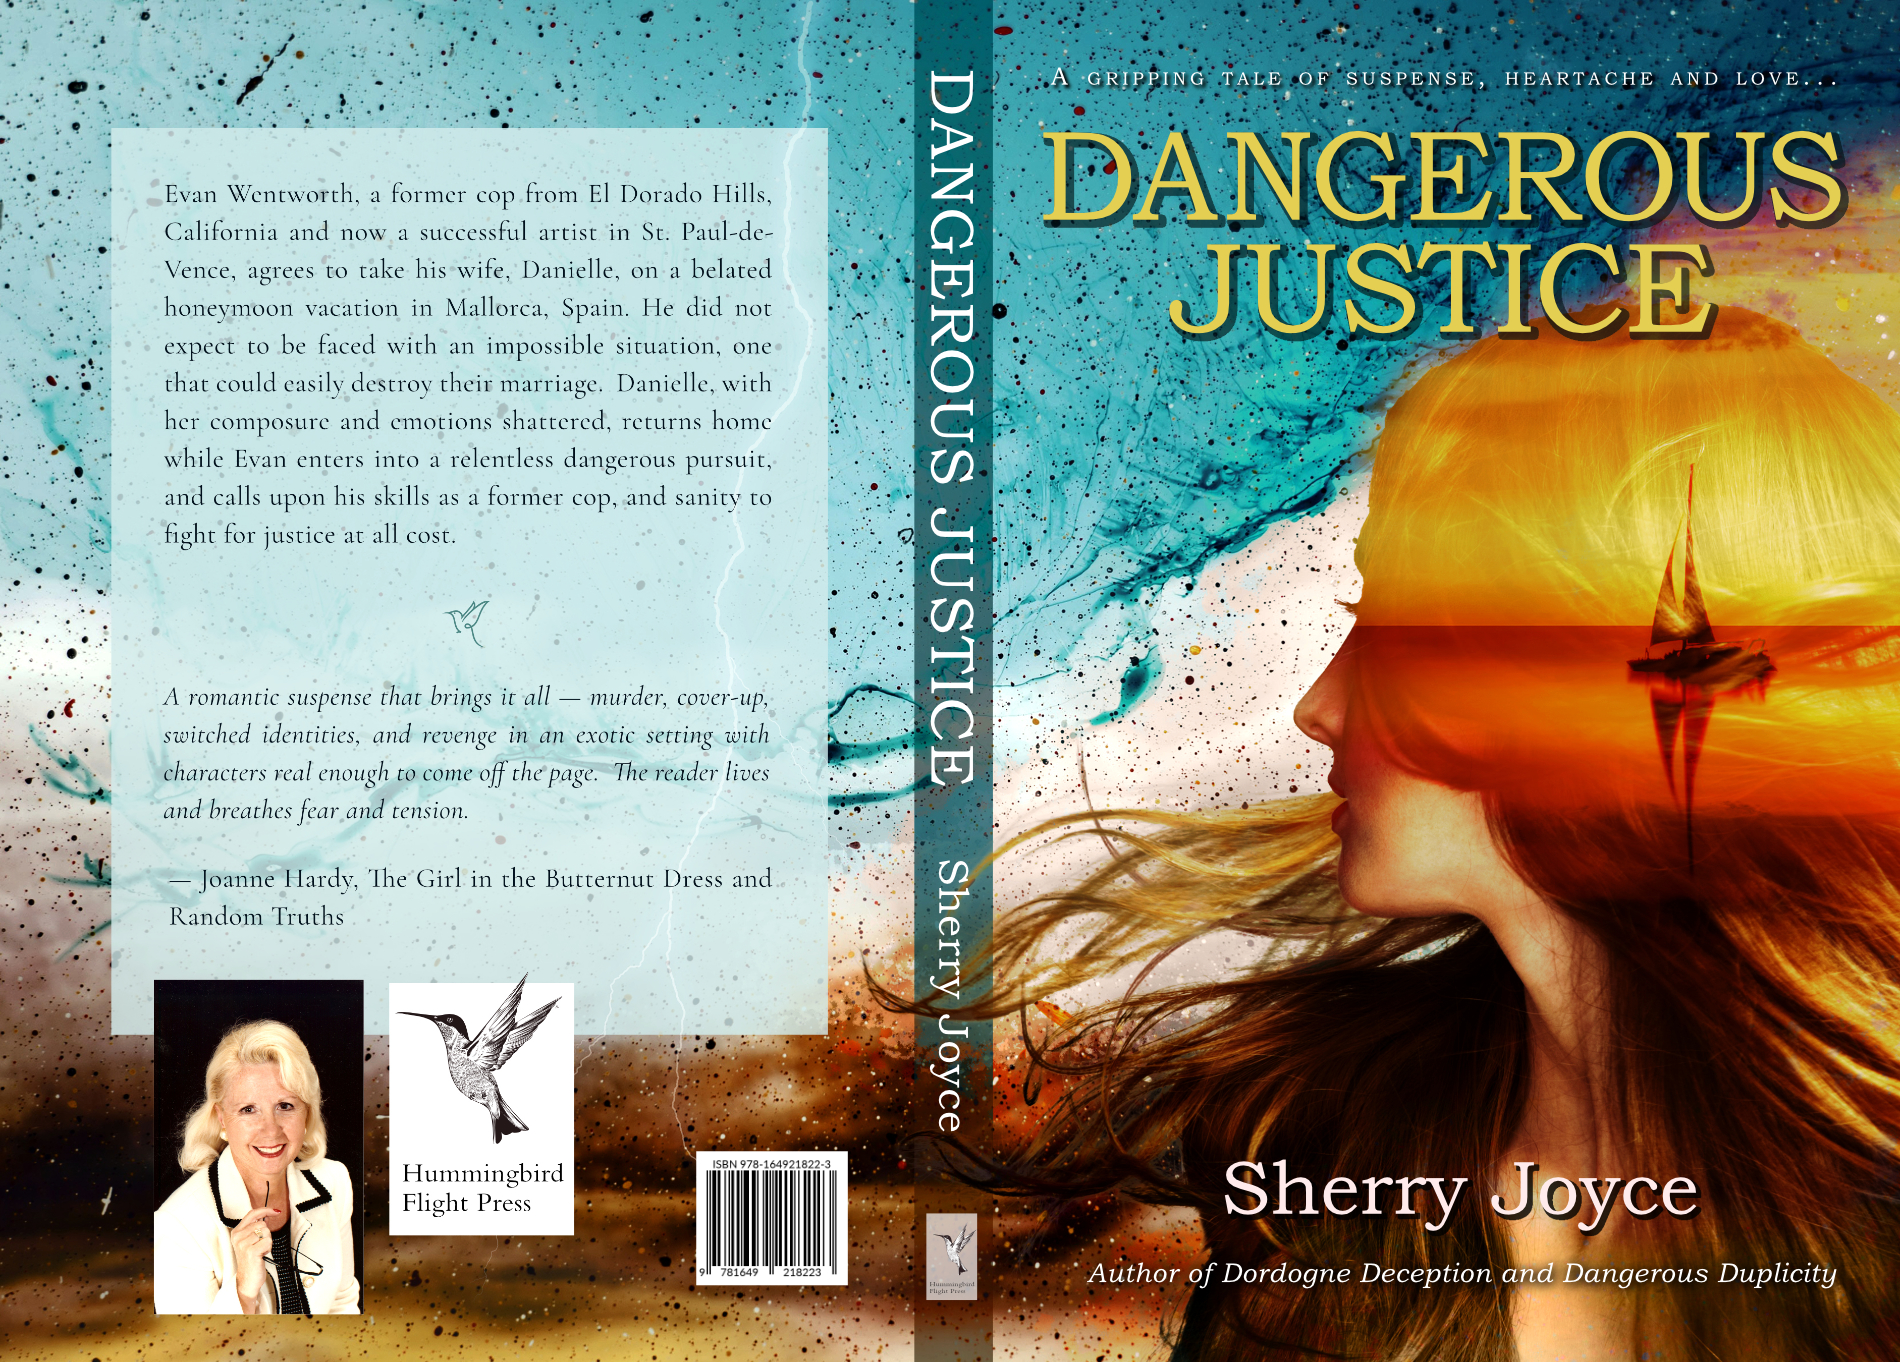 Sherry Joyce - Dangerous Justice Book Cover